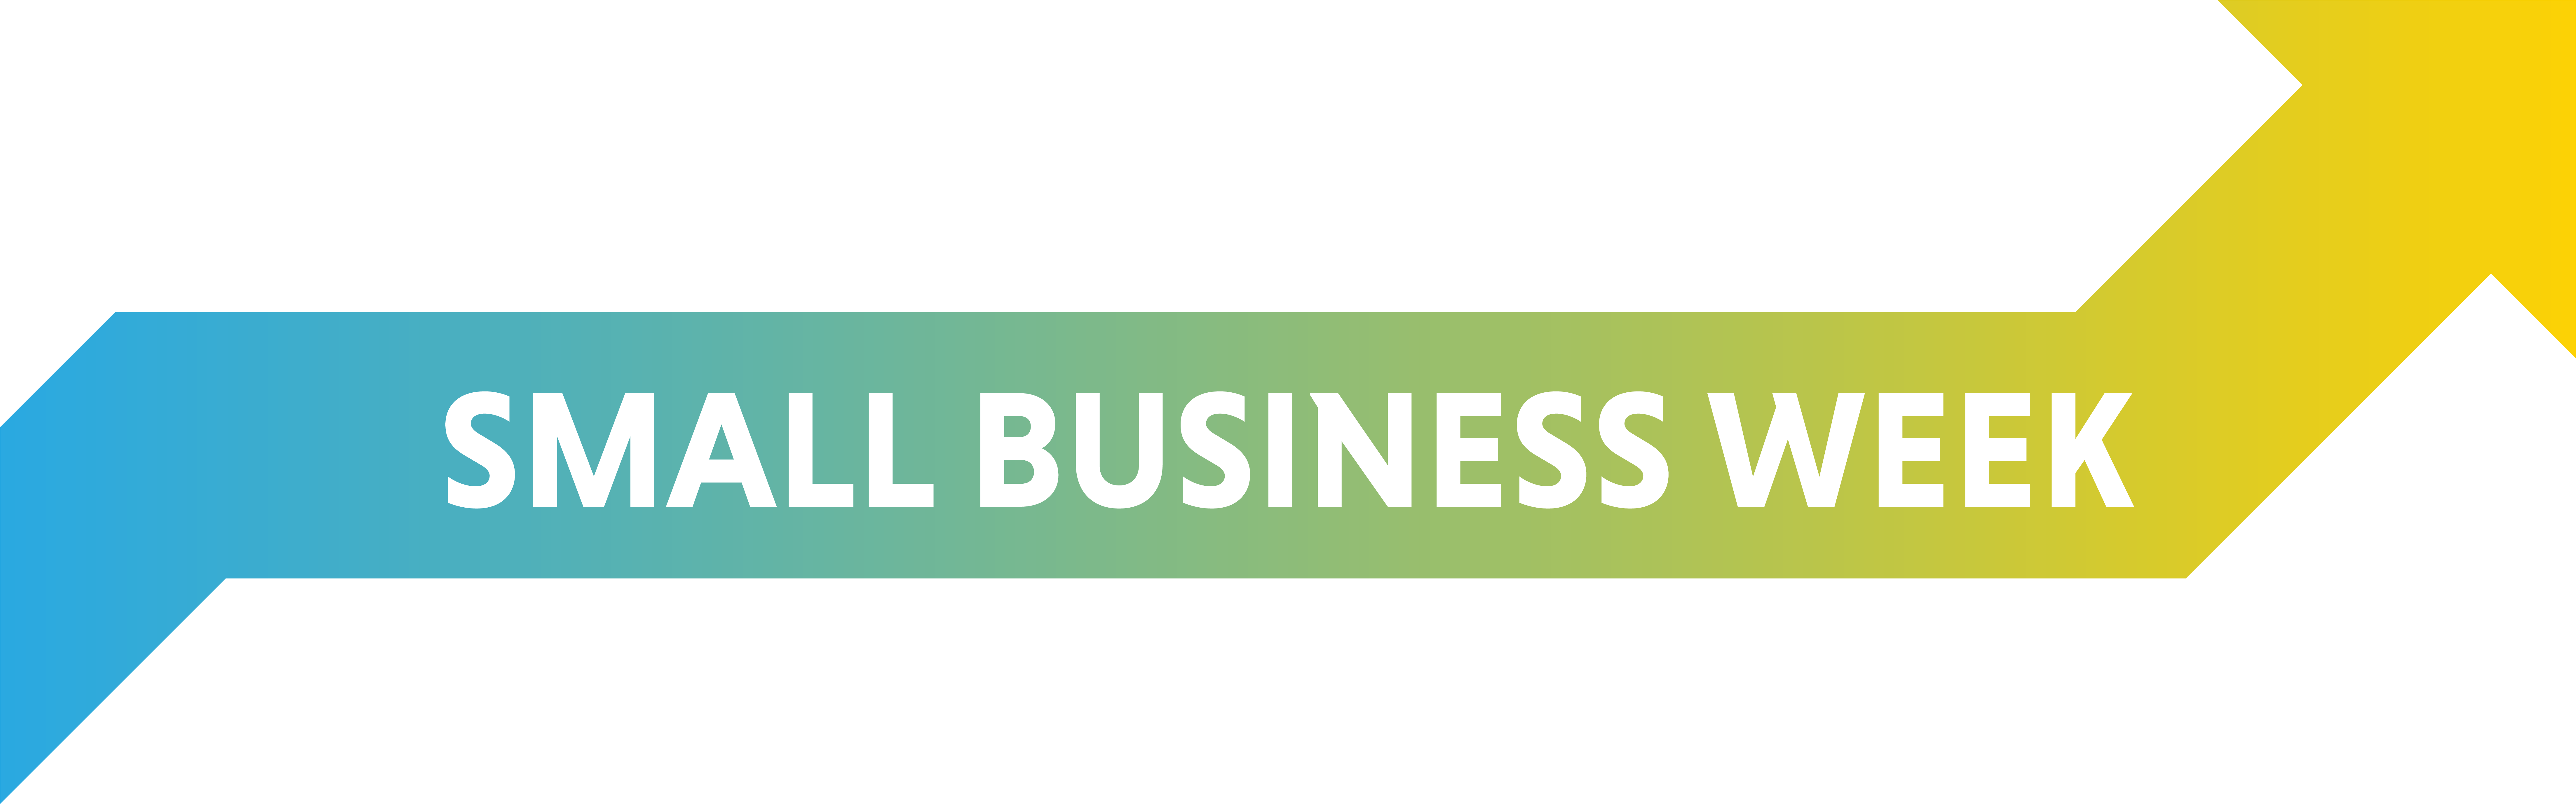 YK Small Business Conference Logo white letters